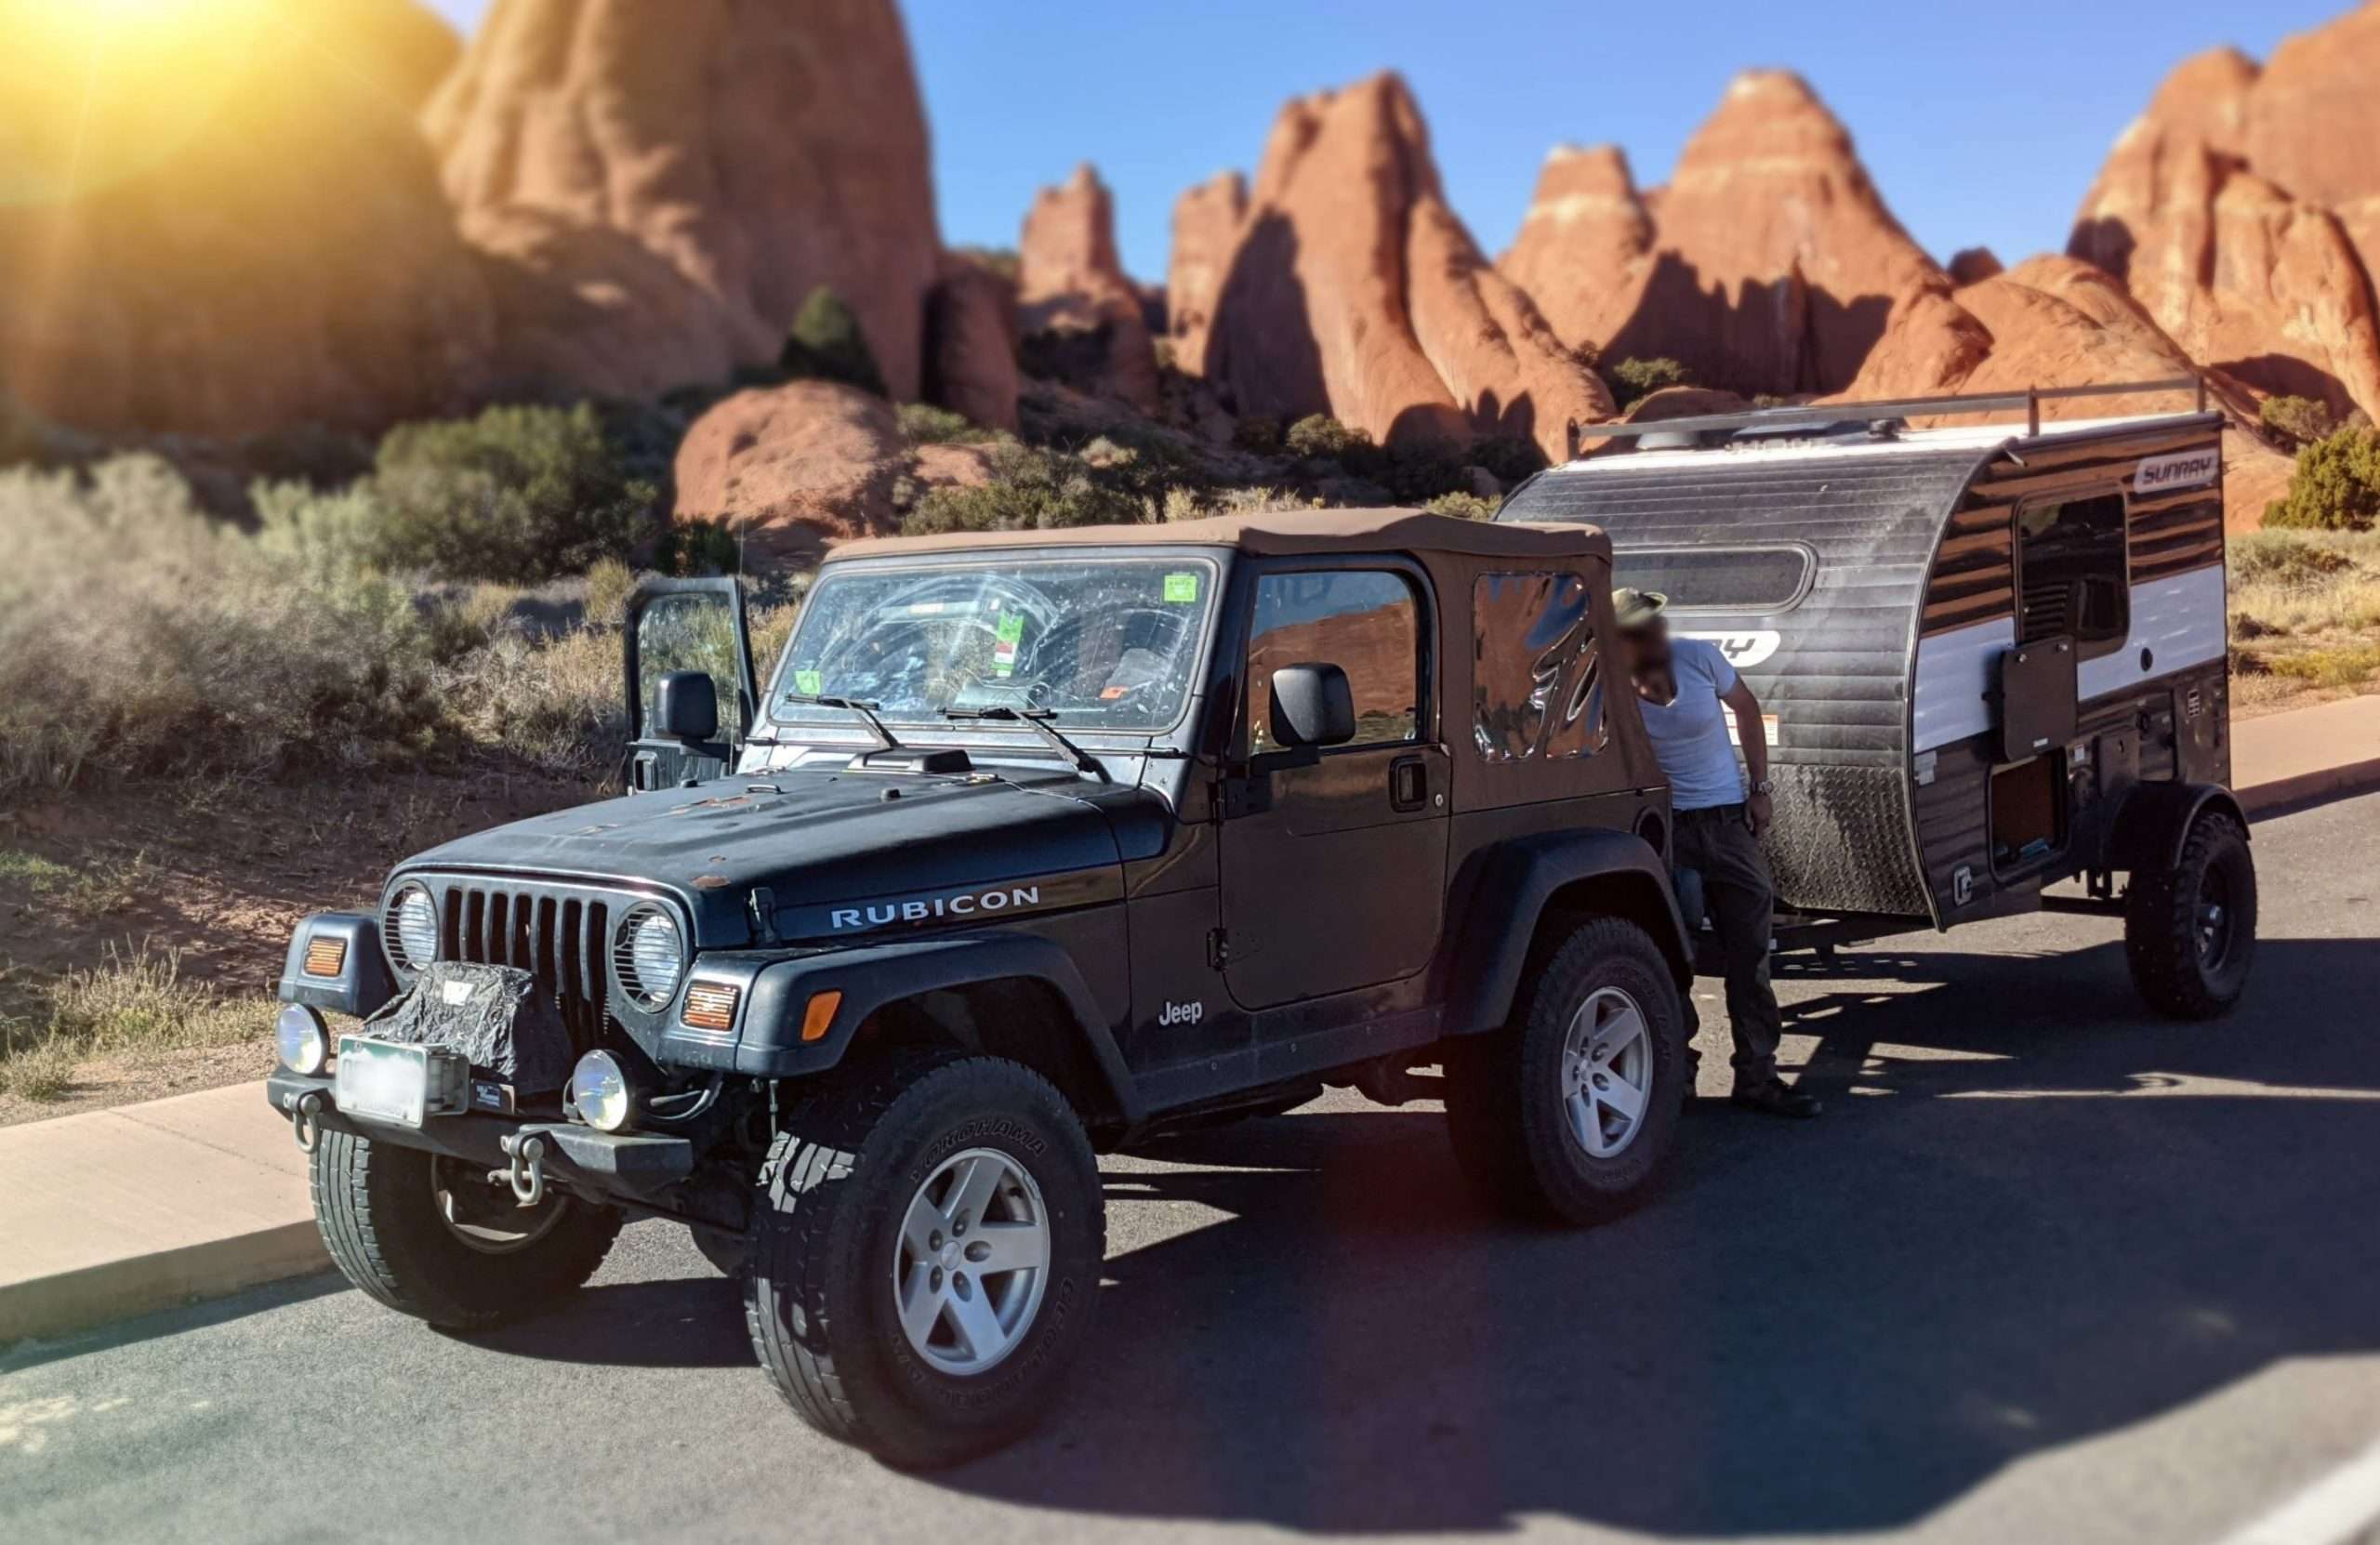 9 Small Campers to Pull Behind Your Jeep Wrangler - Mortons on the Move